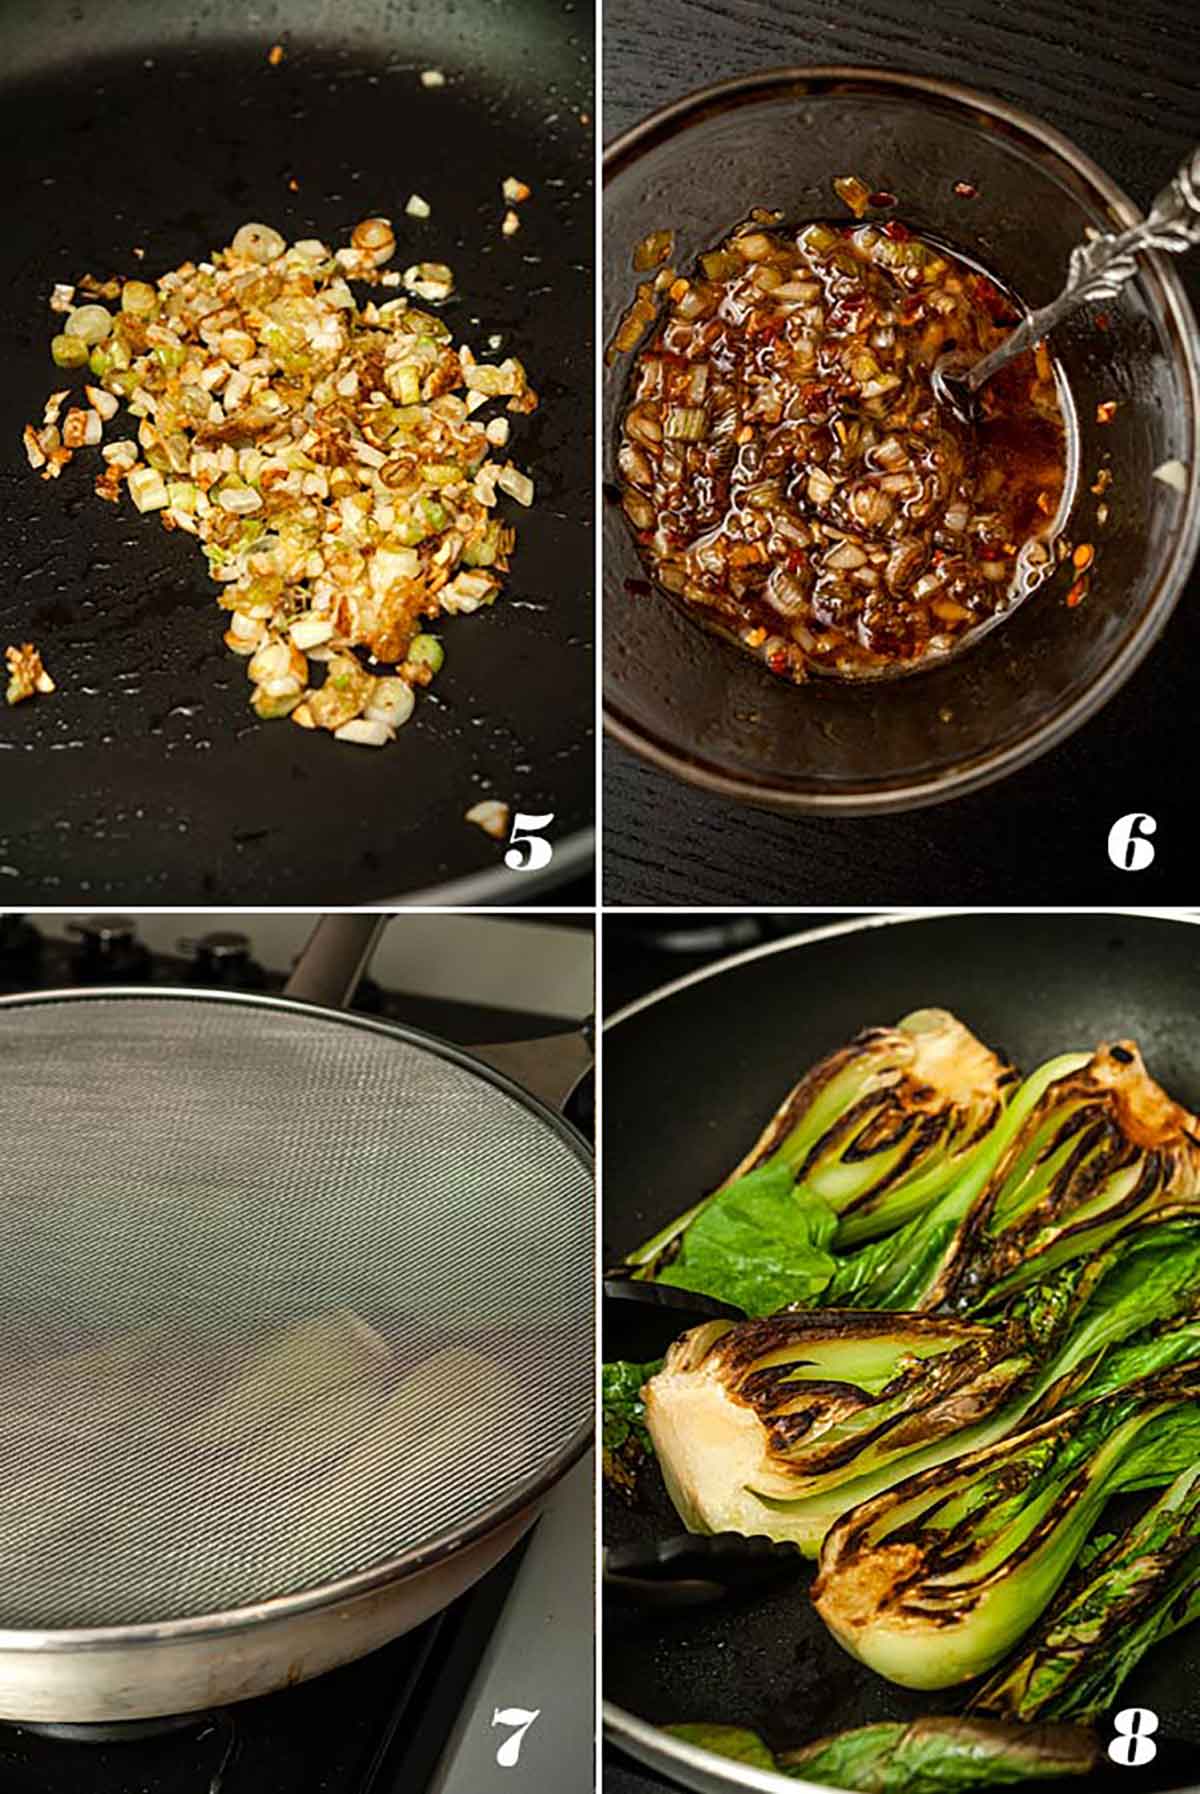 A collage of 4 images showing how to make ginger garlic sauce and sear bok choy.